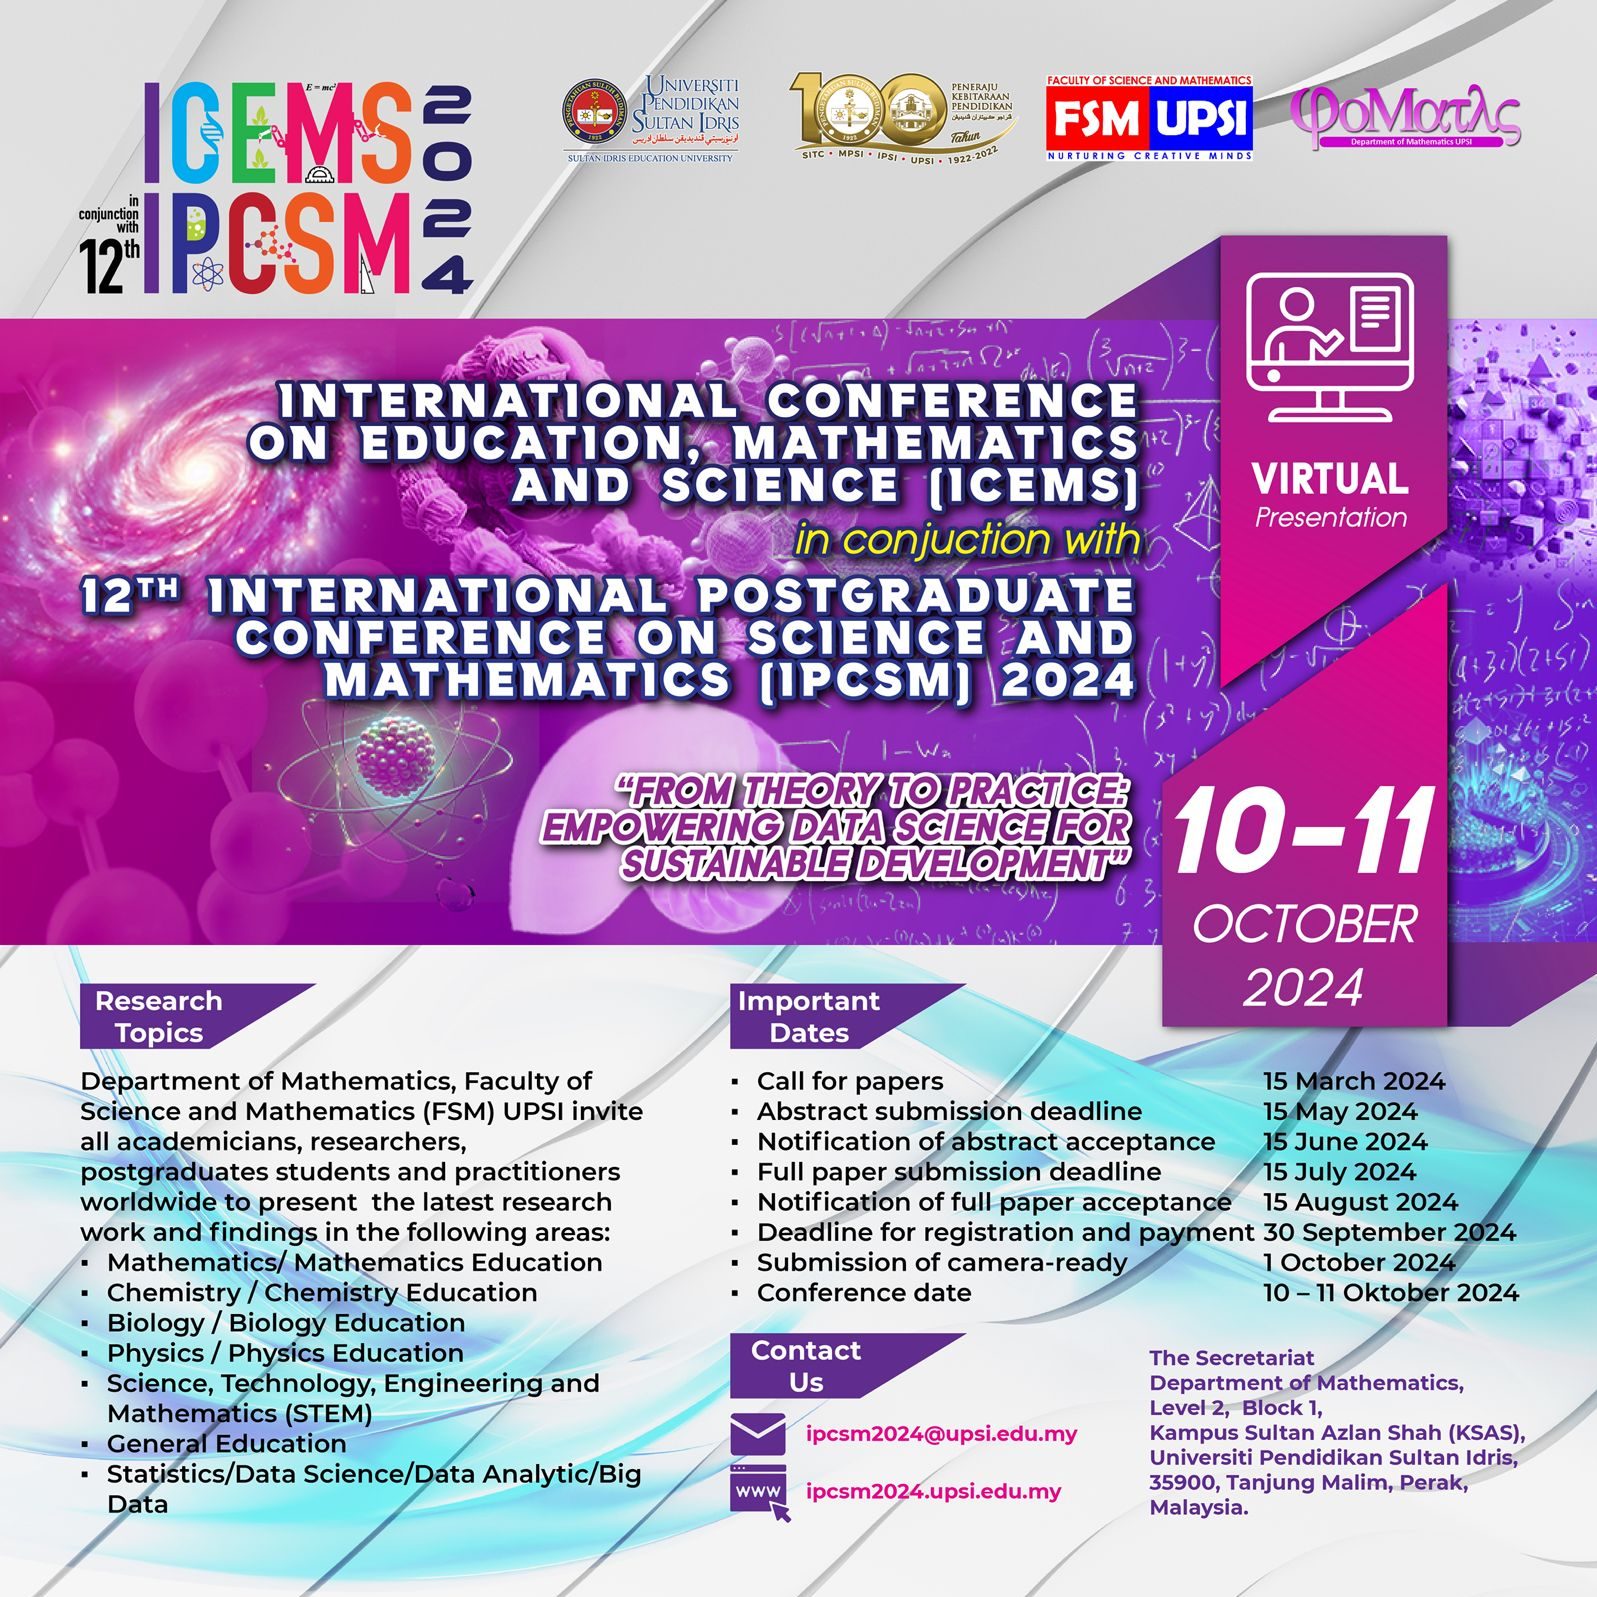 International Conference on Education, Mathematics and Science (ICEMS) in conjunction with 12th International Postgraduate Conference on Science and Mathematics (IPCSM)